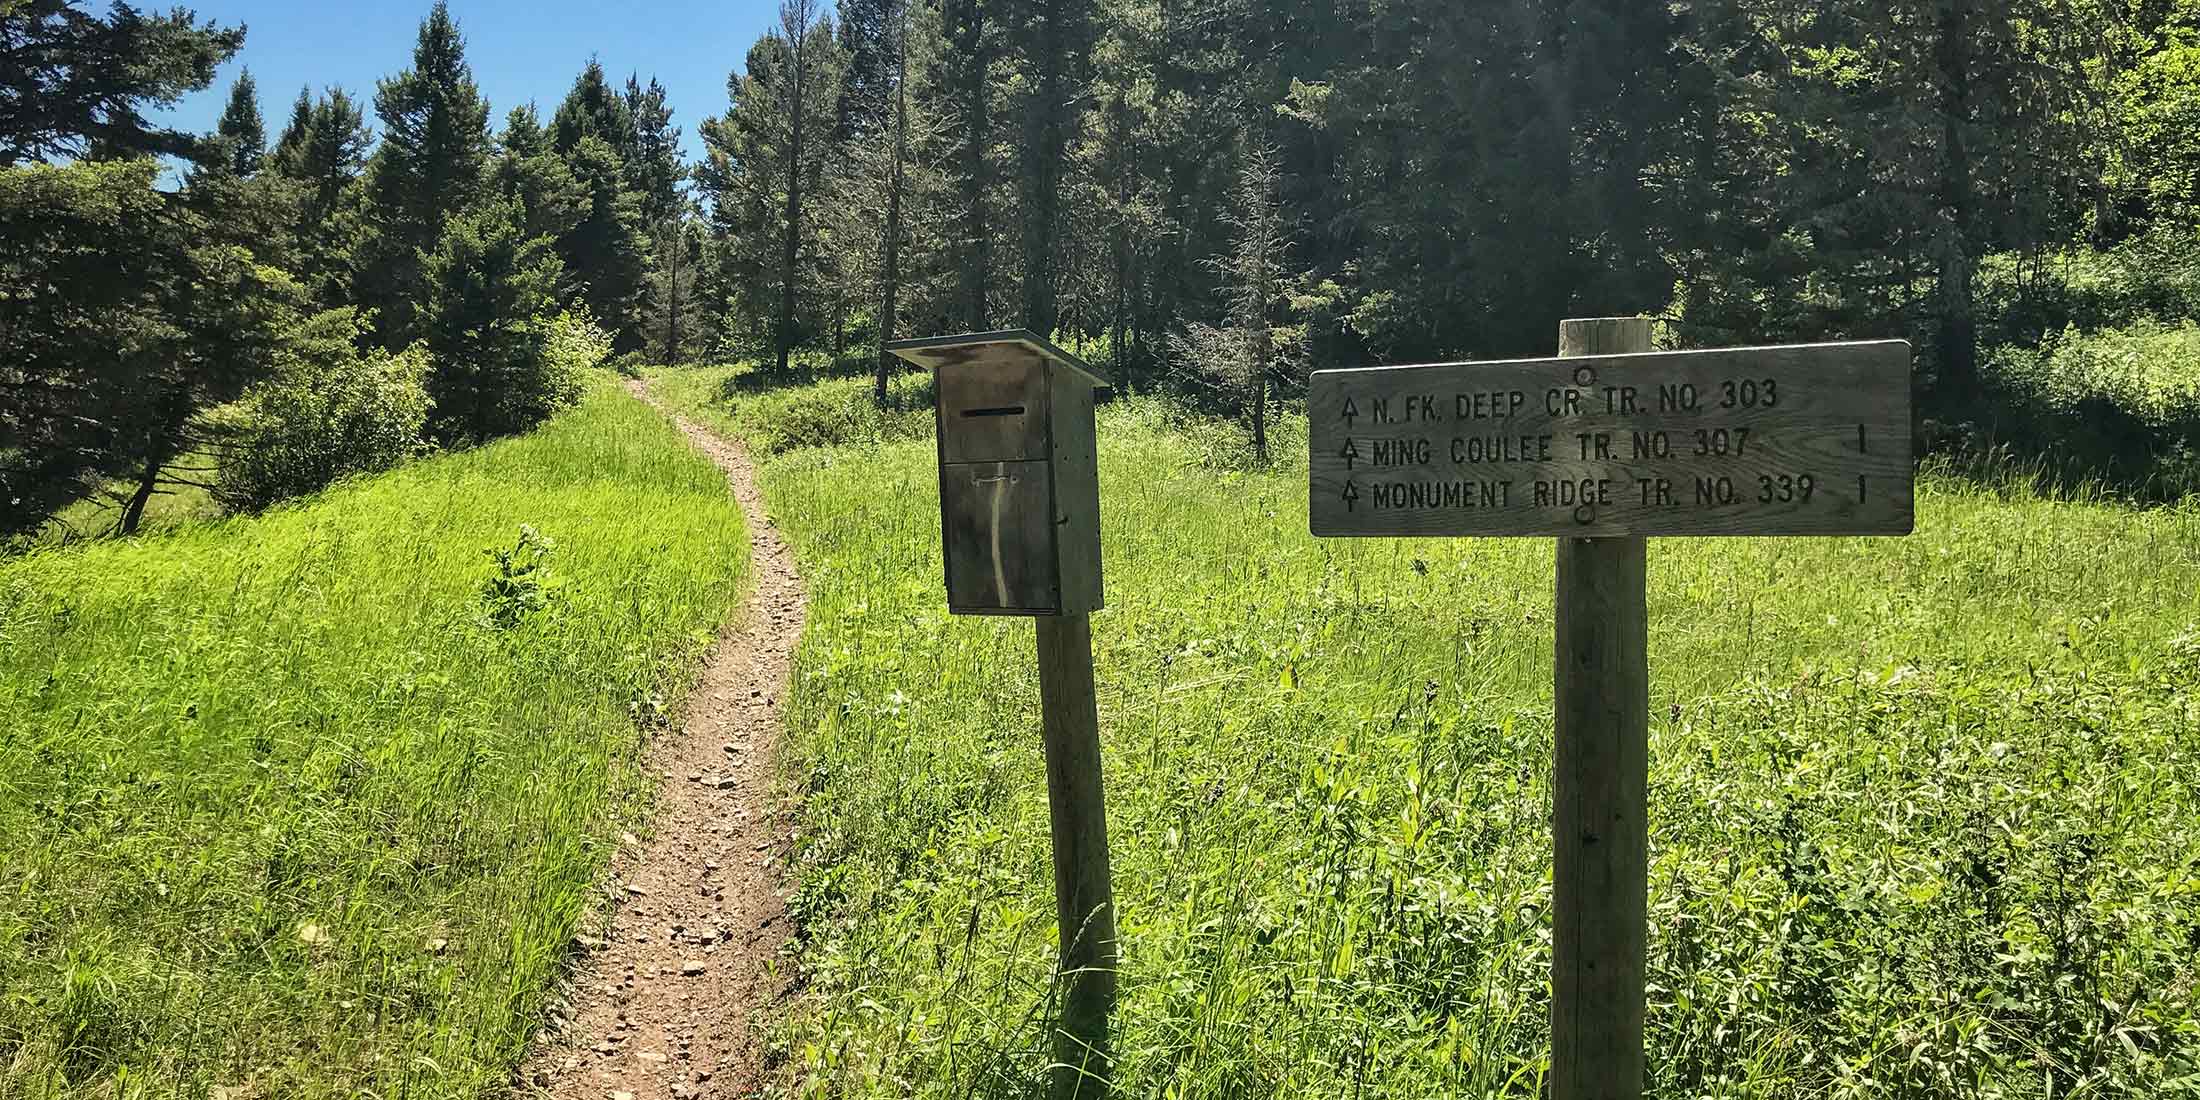 Motorcycle, ATV and Horseback trails leading from Logging Creek section into the Deep Creek section. Located 19.2 miles from Highway 89 on Logging Creek Road in the Little Belt Mountains. 